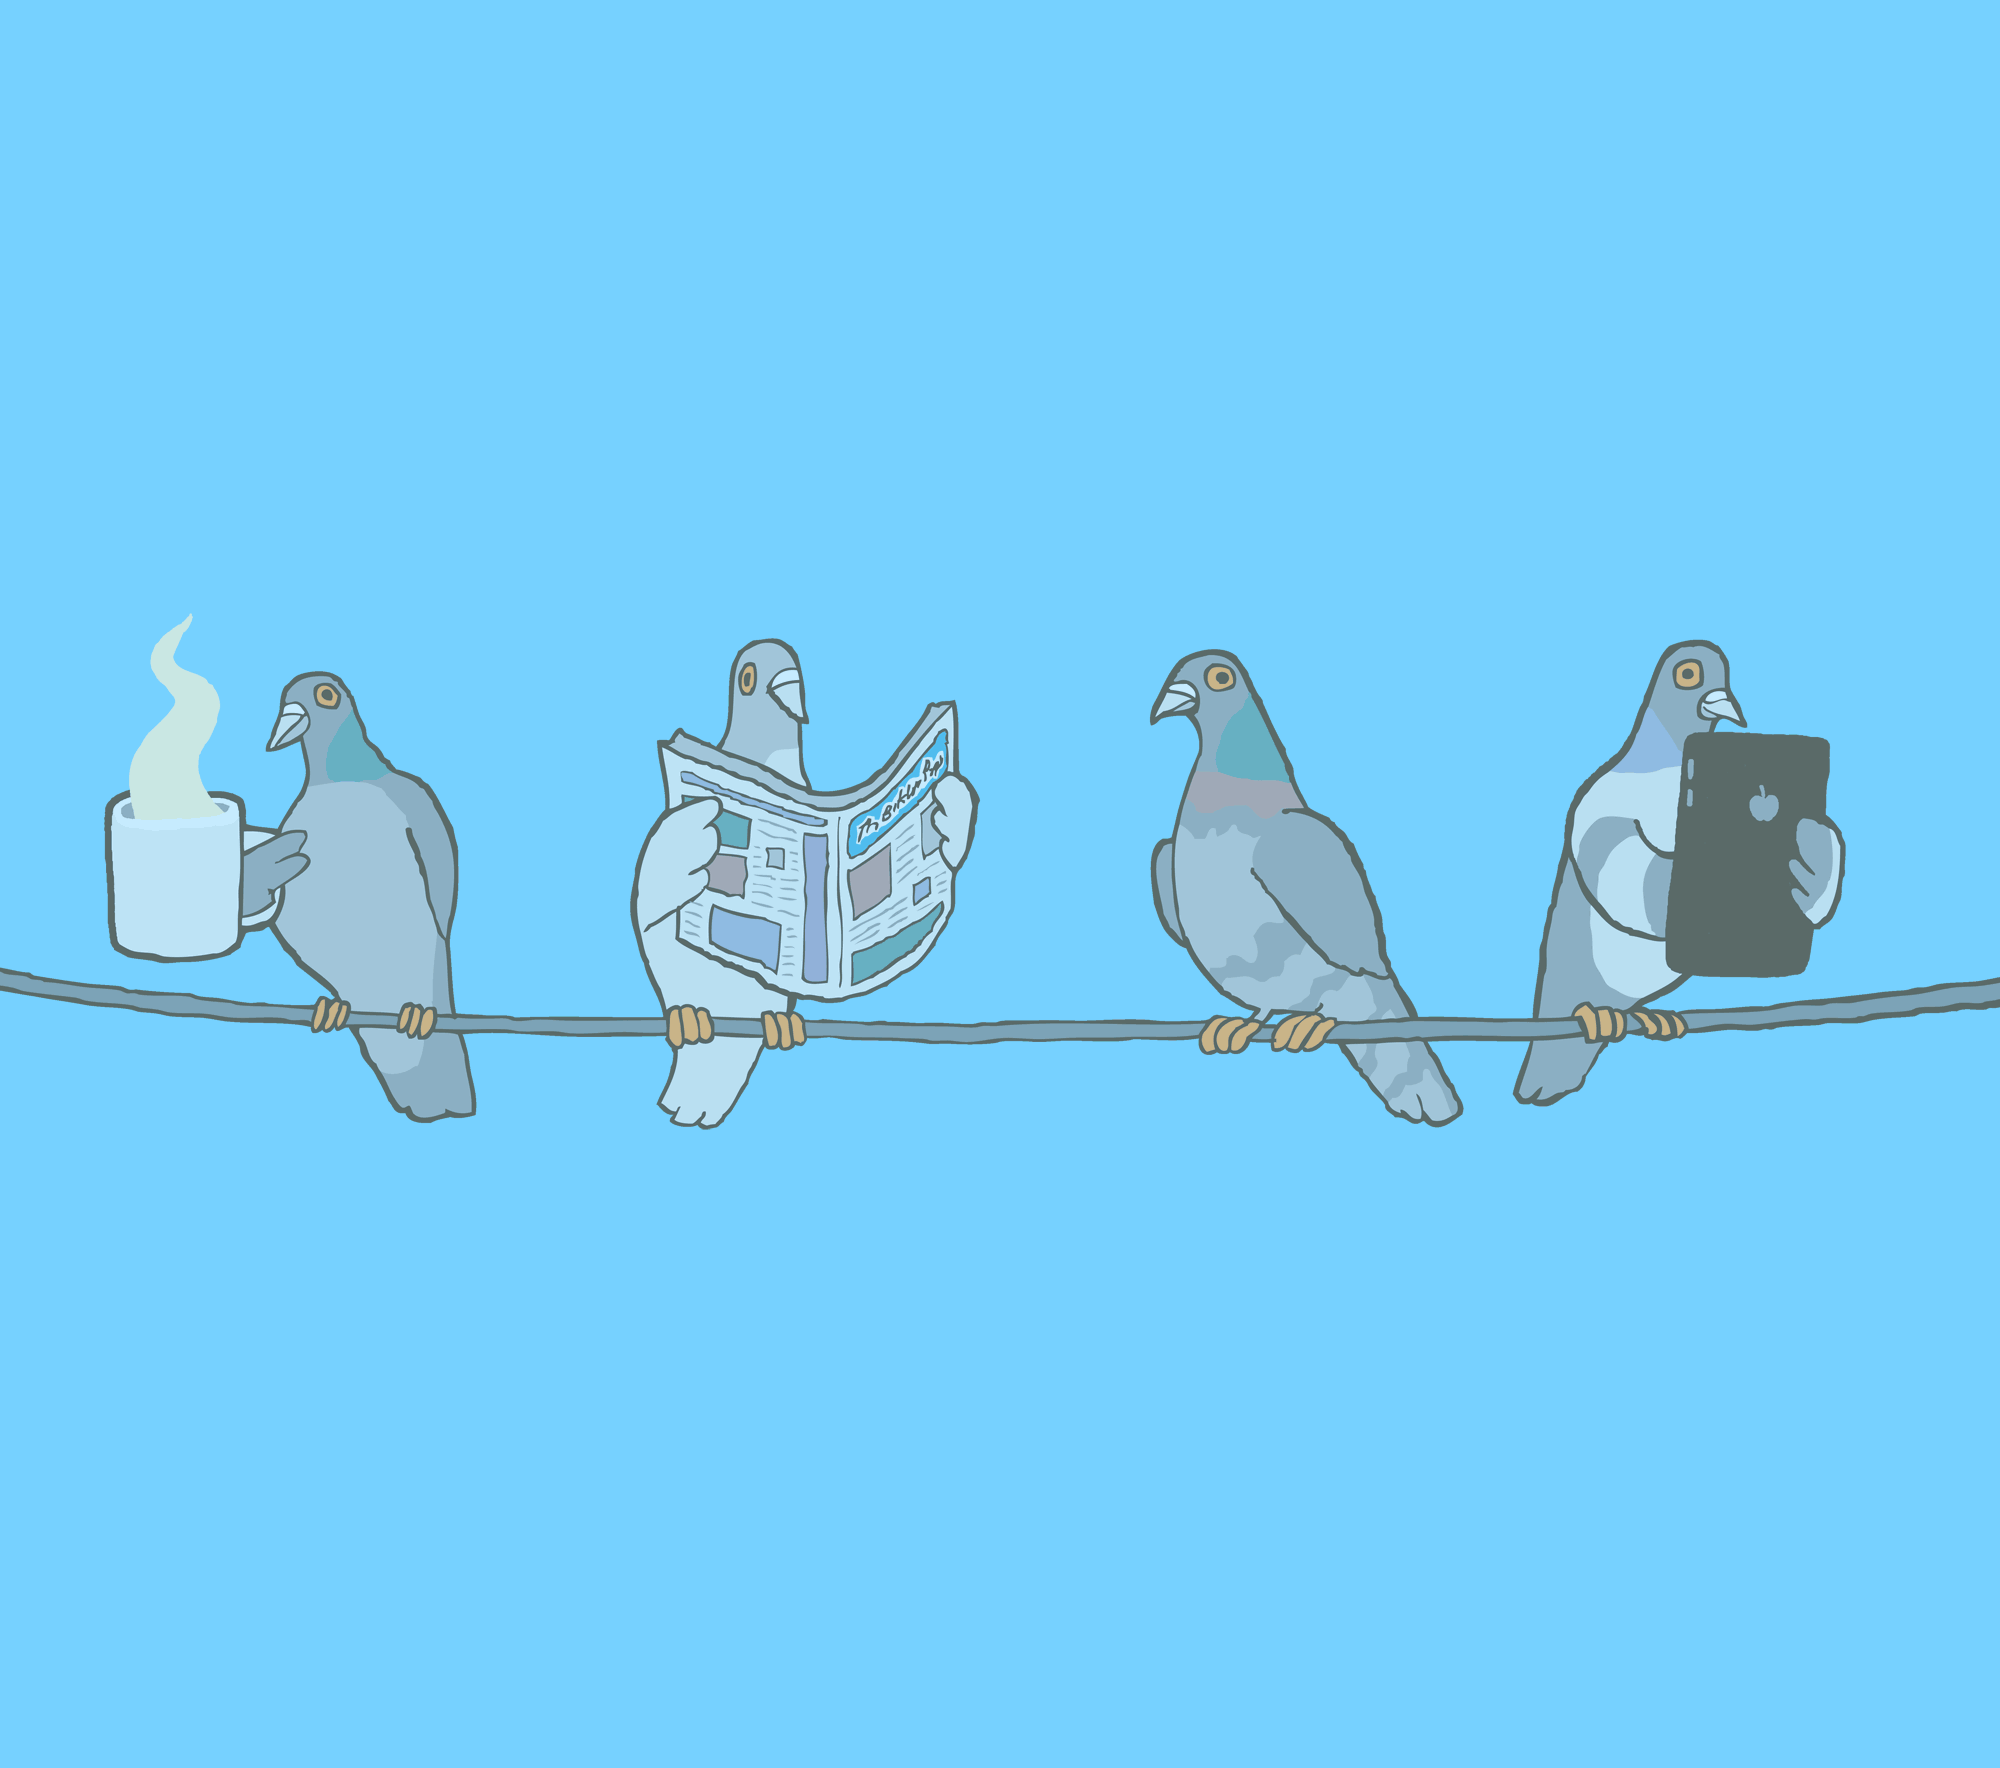 This is a cartoon version of pigeons on a wire.